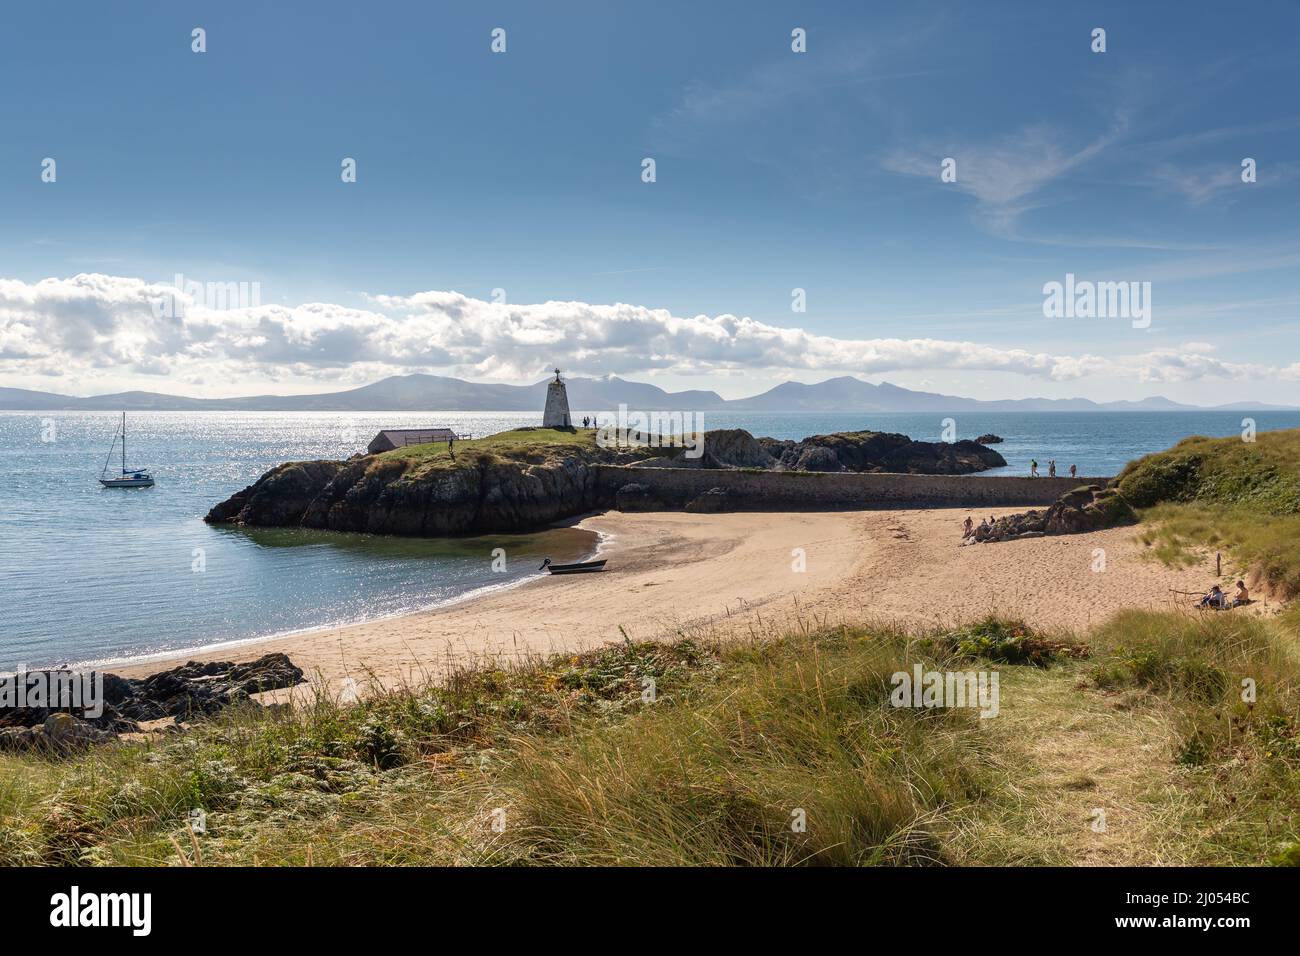 Llanddwyn, Wales: Twr Bach (Little Tower), Anglesey, overlooking the Irish sea. A day beacon used to guide ships in to the Menai s Stock Photo